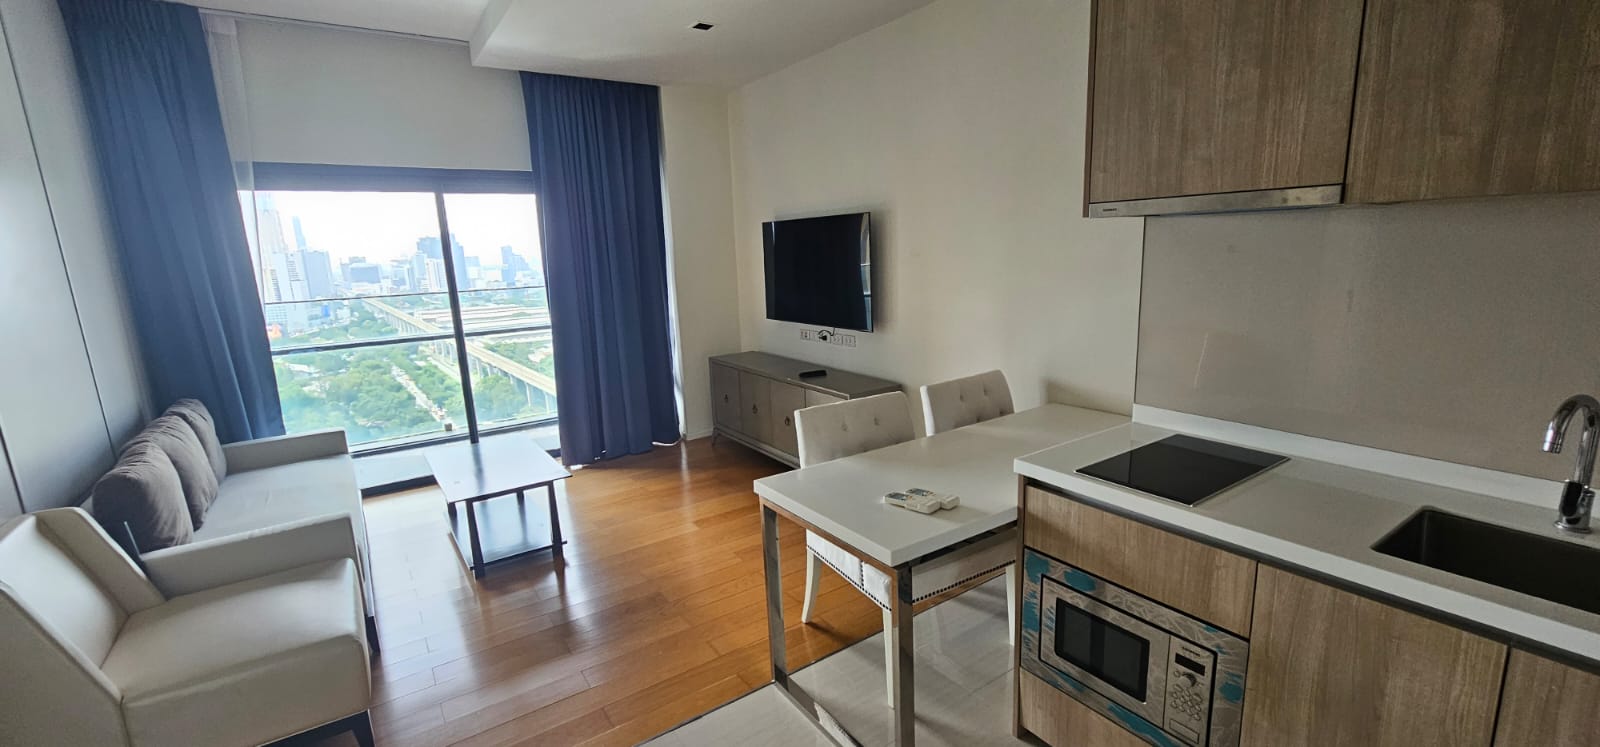 1 Bedroom, 1 Bathroom 46 sqm size at Circle Living Prototype For Rent 25K THB